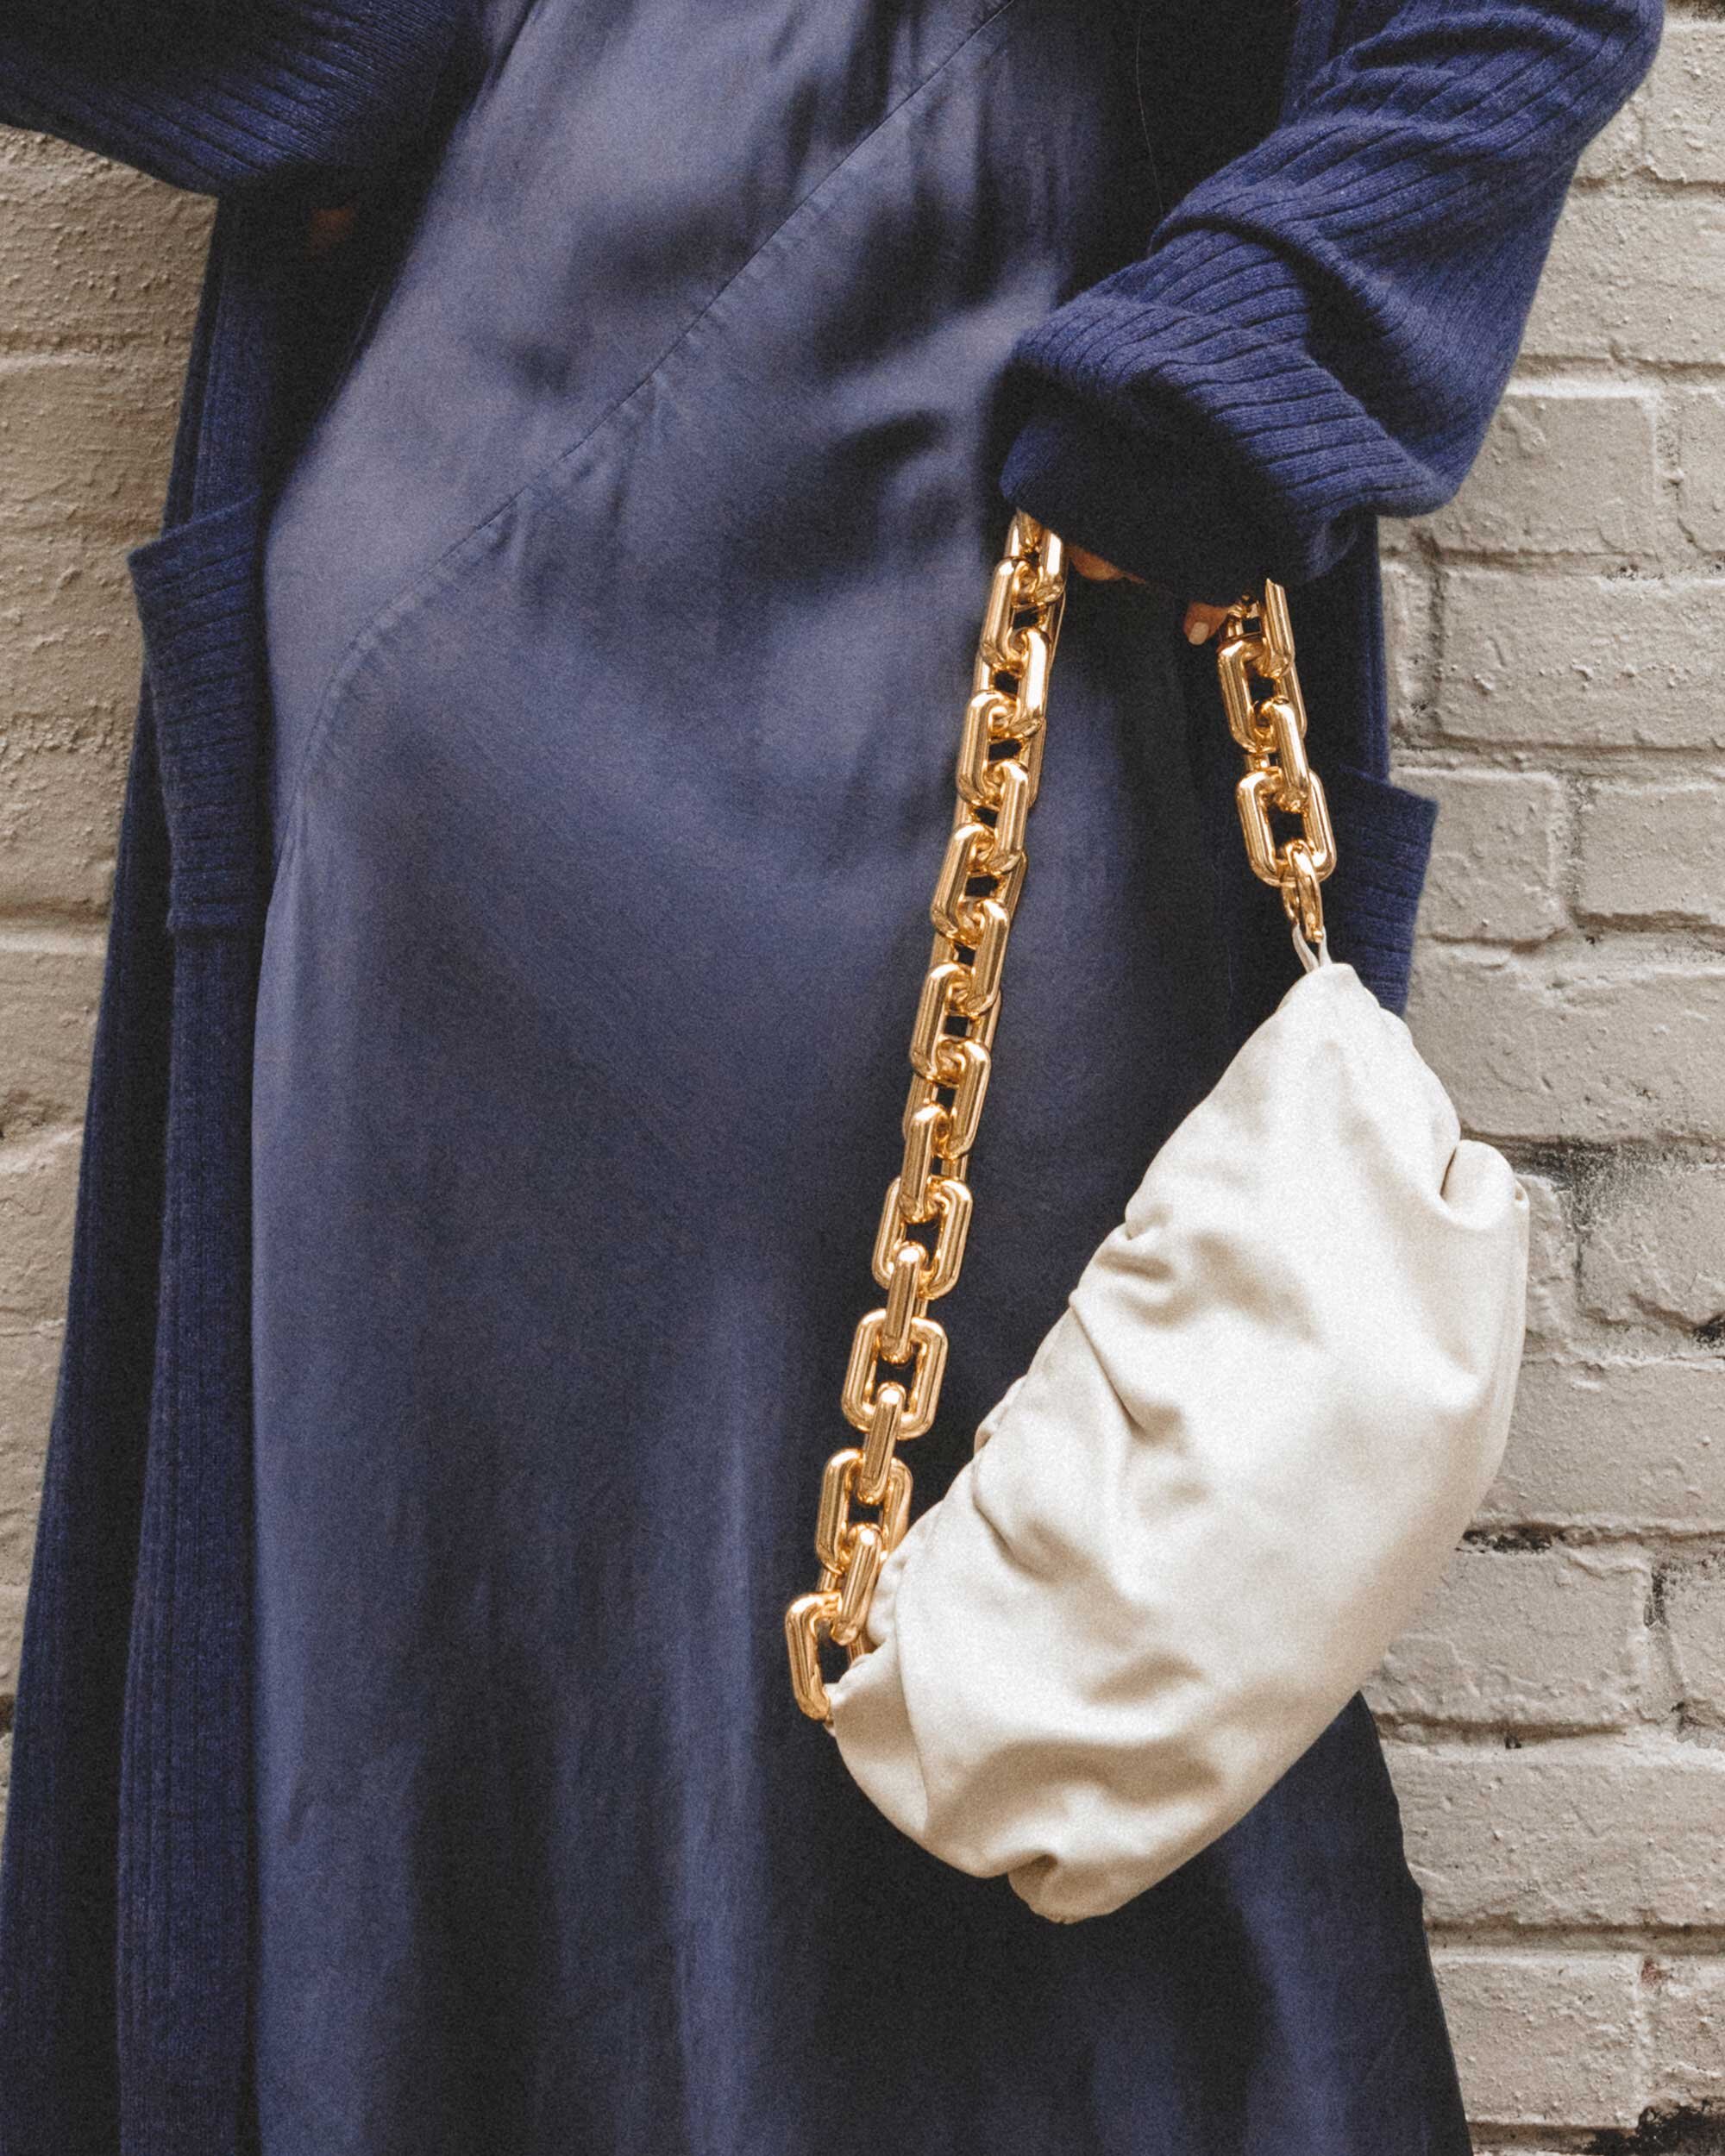 How to style a dress for winter. Sarah Butler of @sarahchristine wearing Line and Dot navy silk satin dress, Sablyn Long Cashmere Sweater, and Bottega Veneta The Chain Pouch Leather Clutch in Seattle, Washington -1.jpg